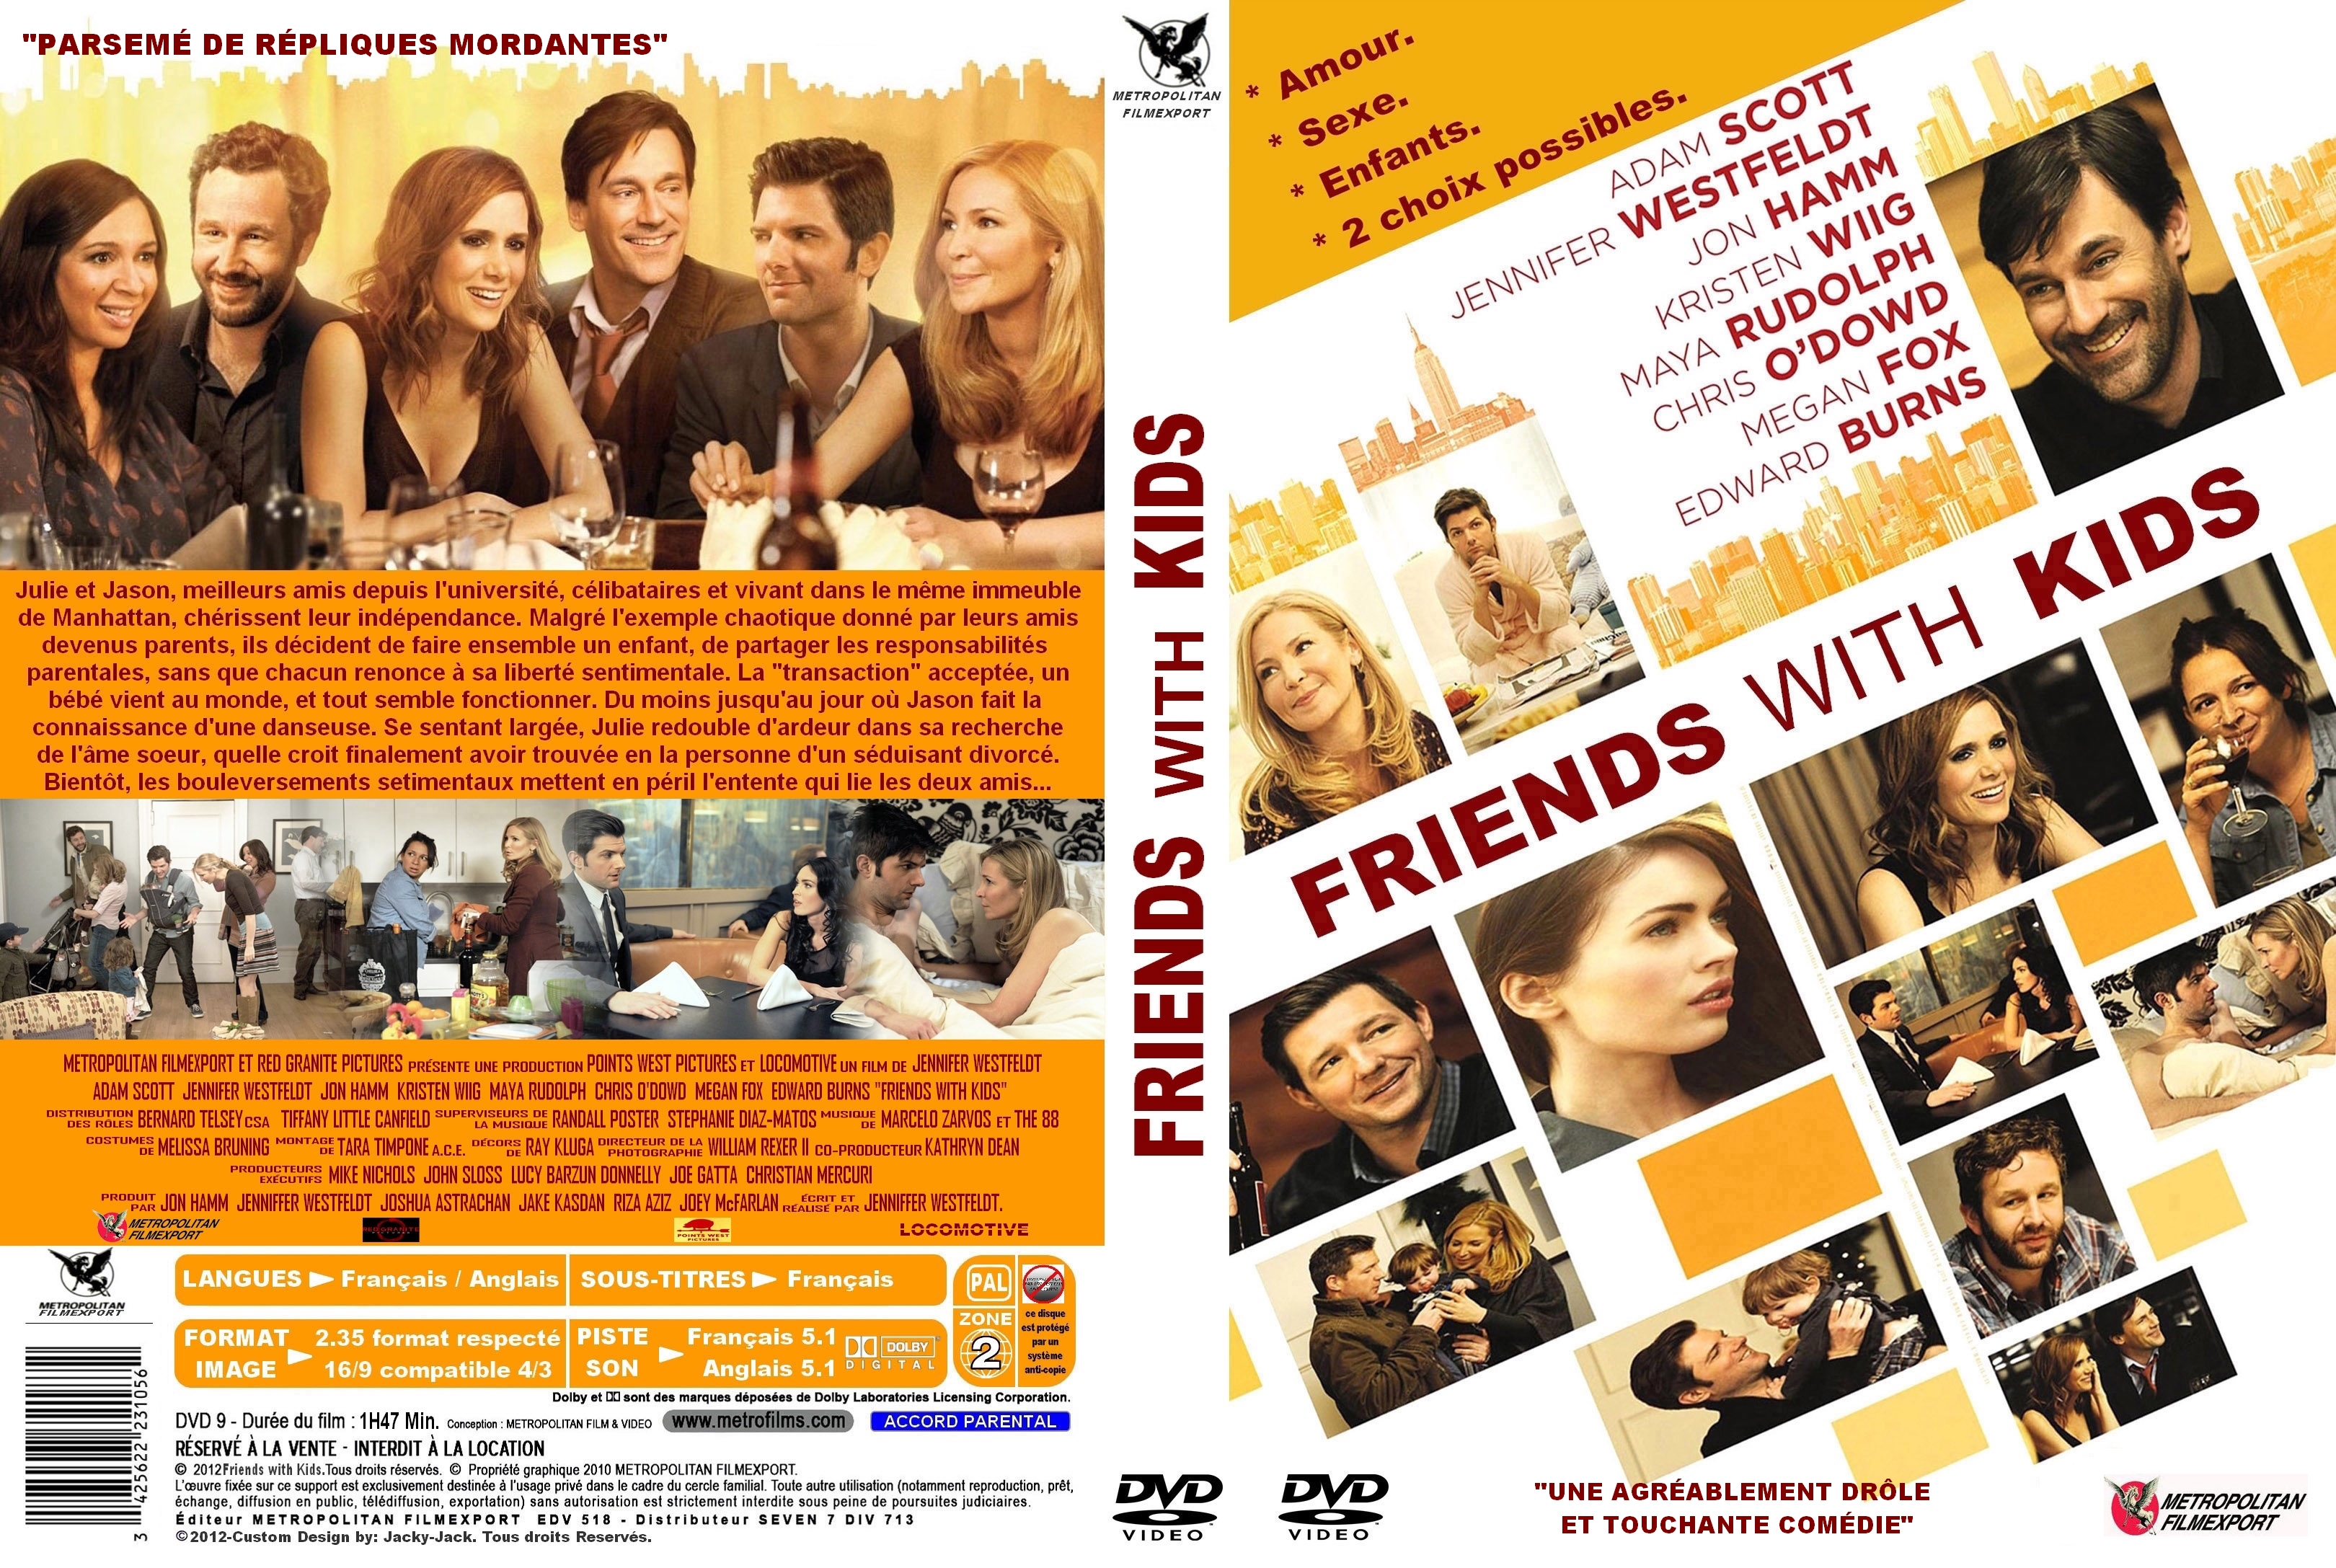 Jaquette DVD Friends with kids custom